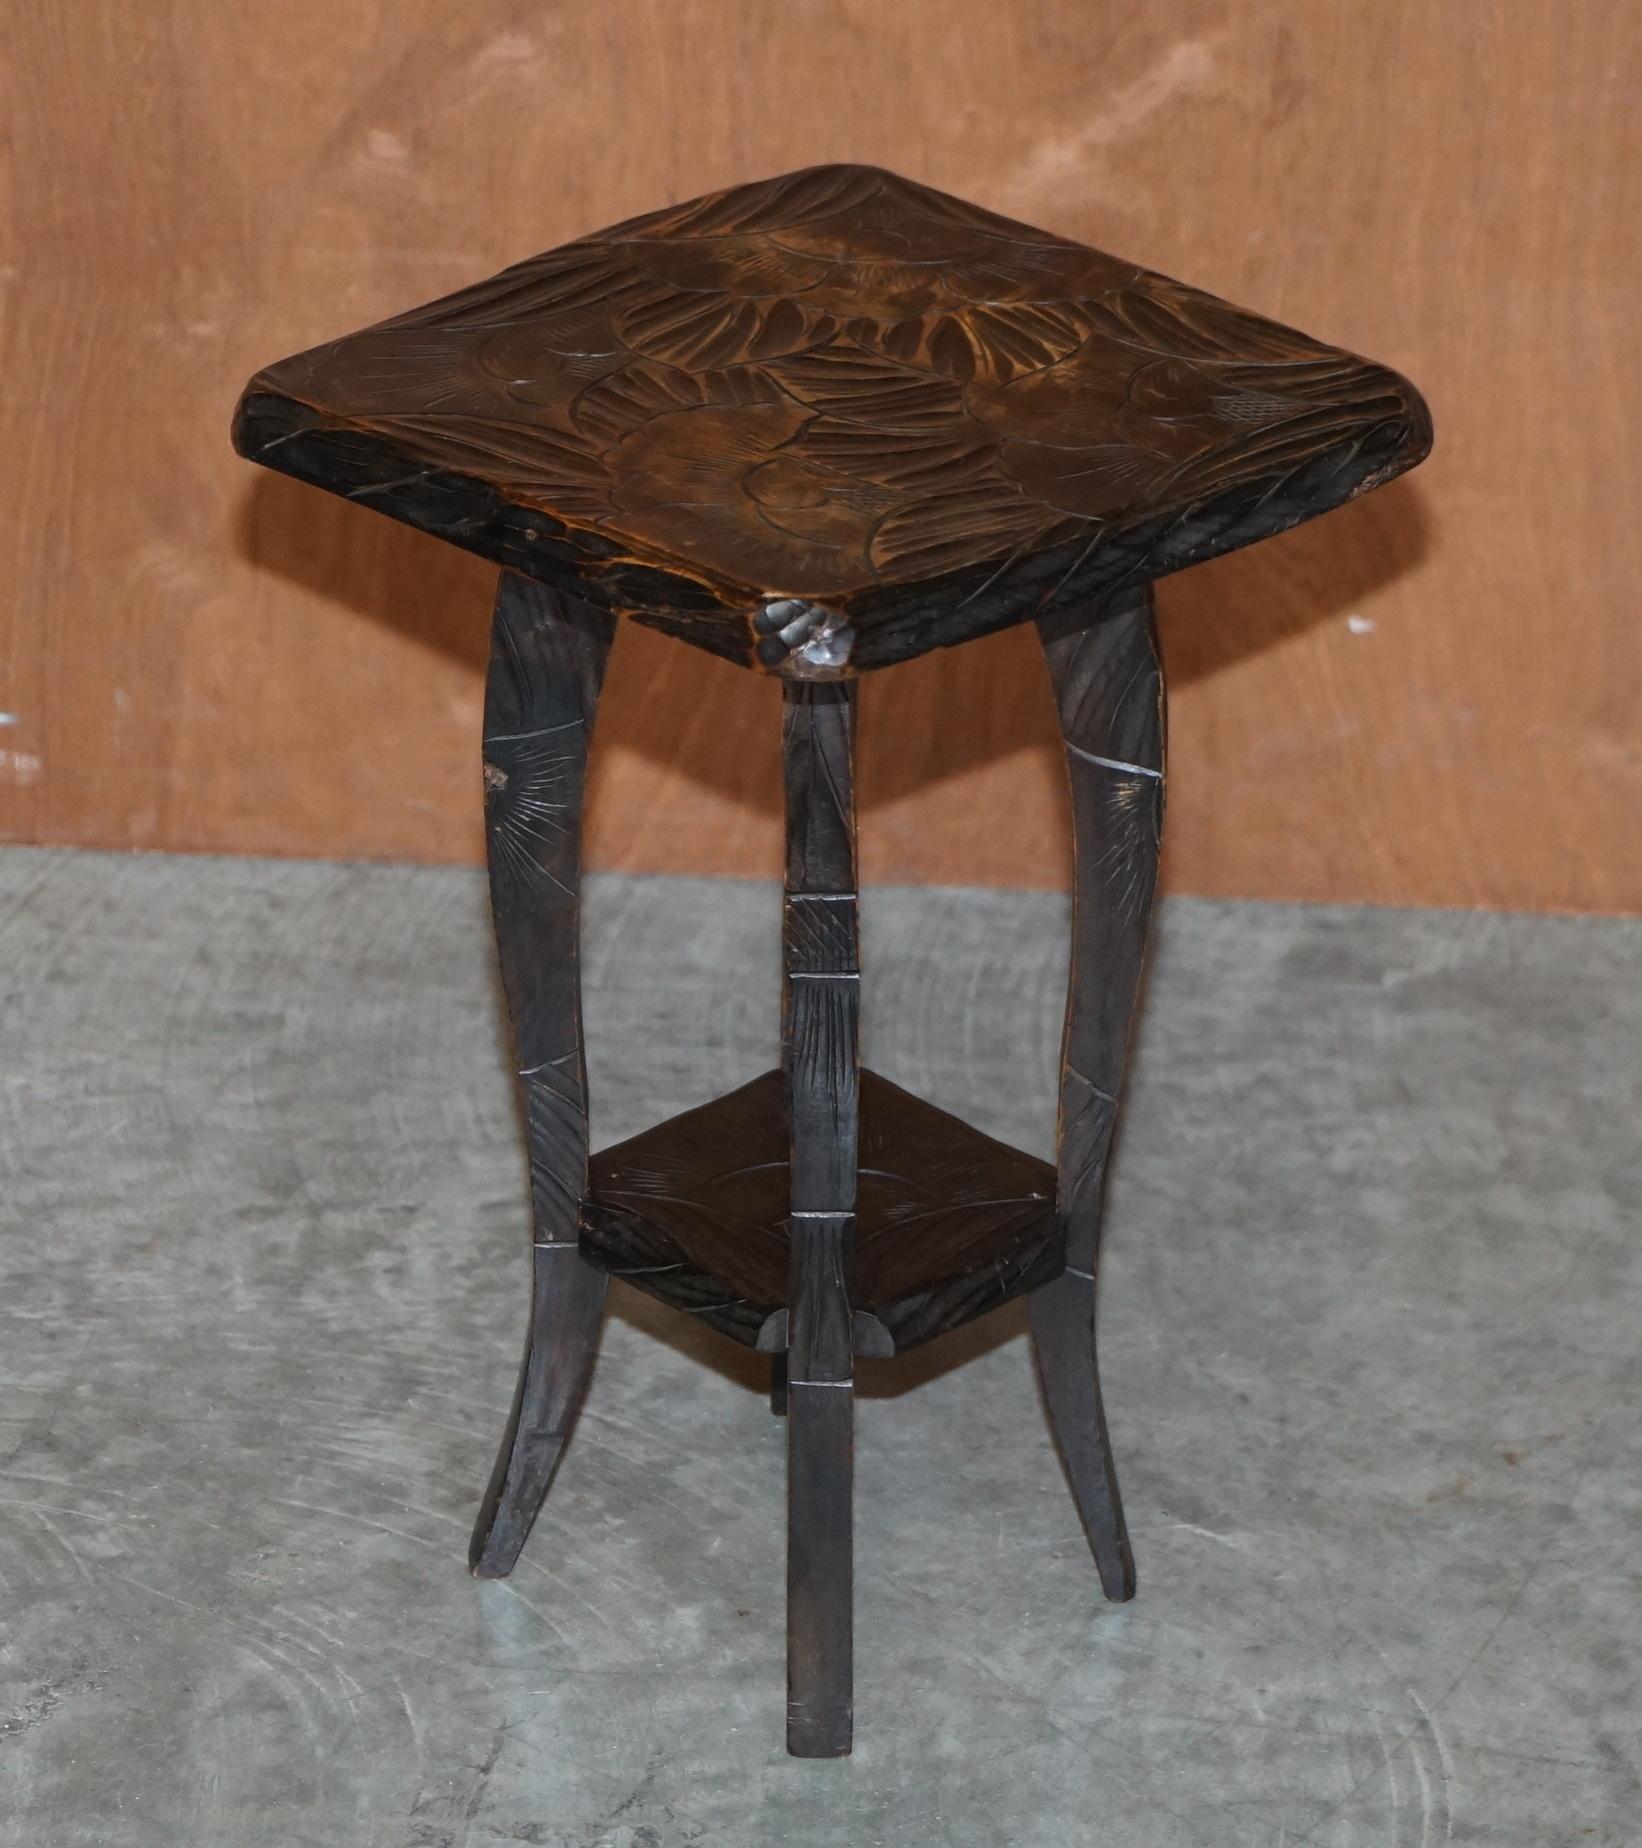 We are delighted to offer for sale this lovely pair of Liberty’s London 1905 Japanese mahogany side tables hand carved with floral detailing 

A good-looking pair, they are hand carved from top to bottom with floral detailing, these have the